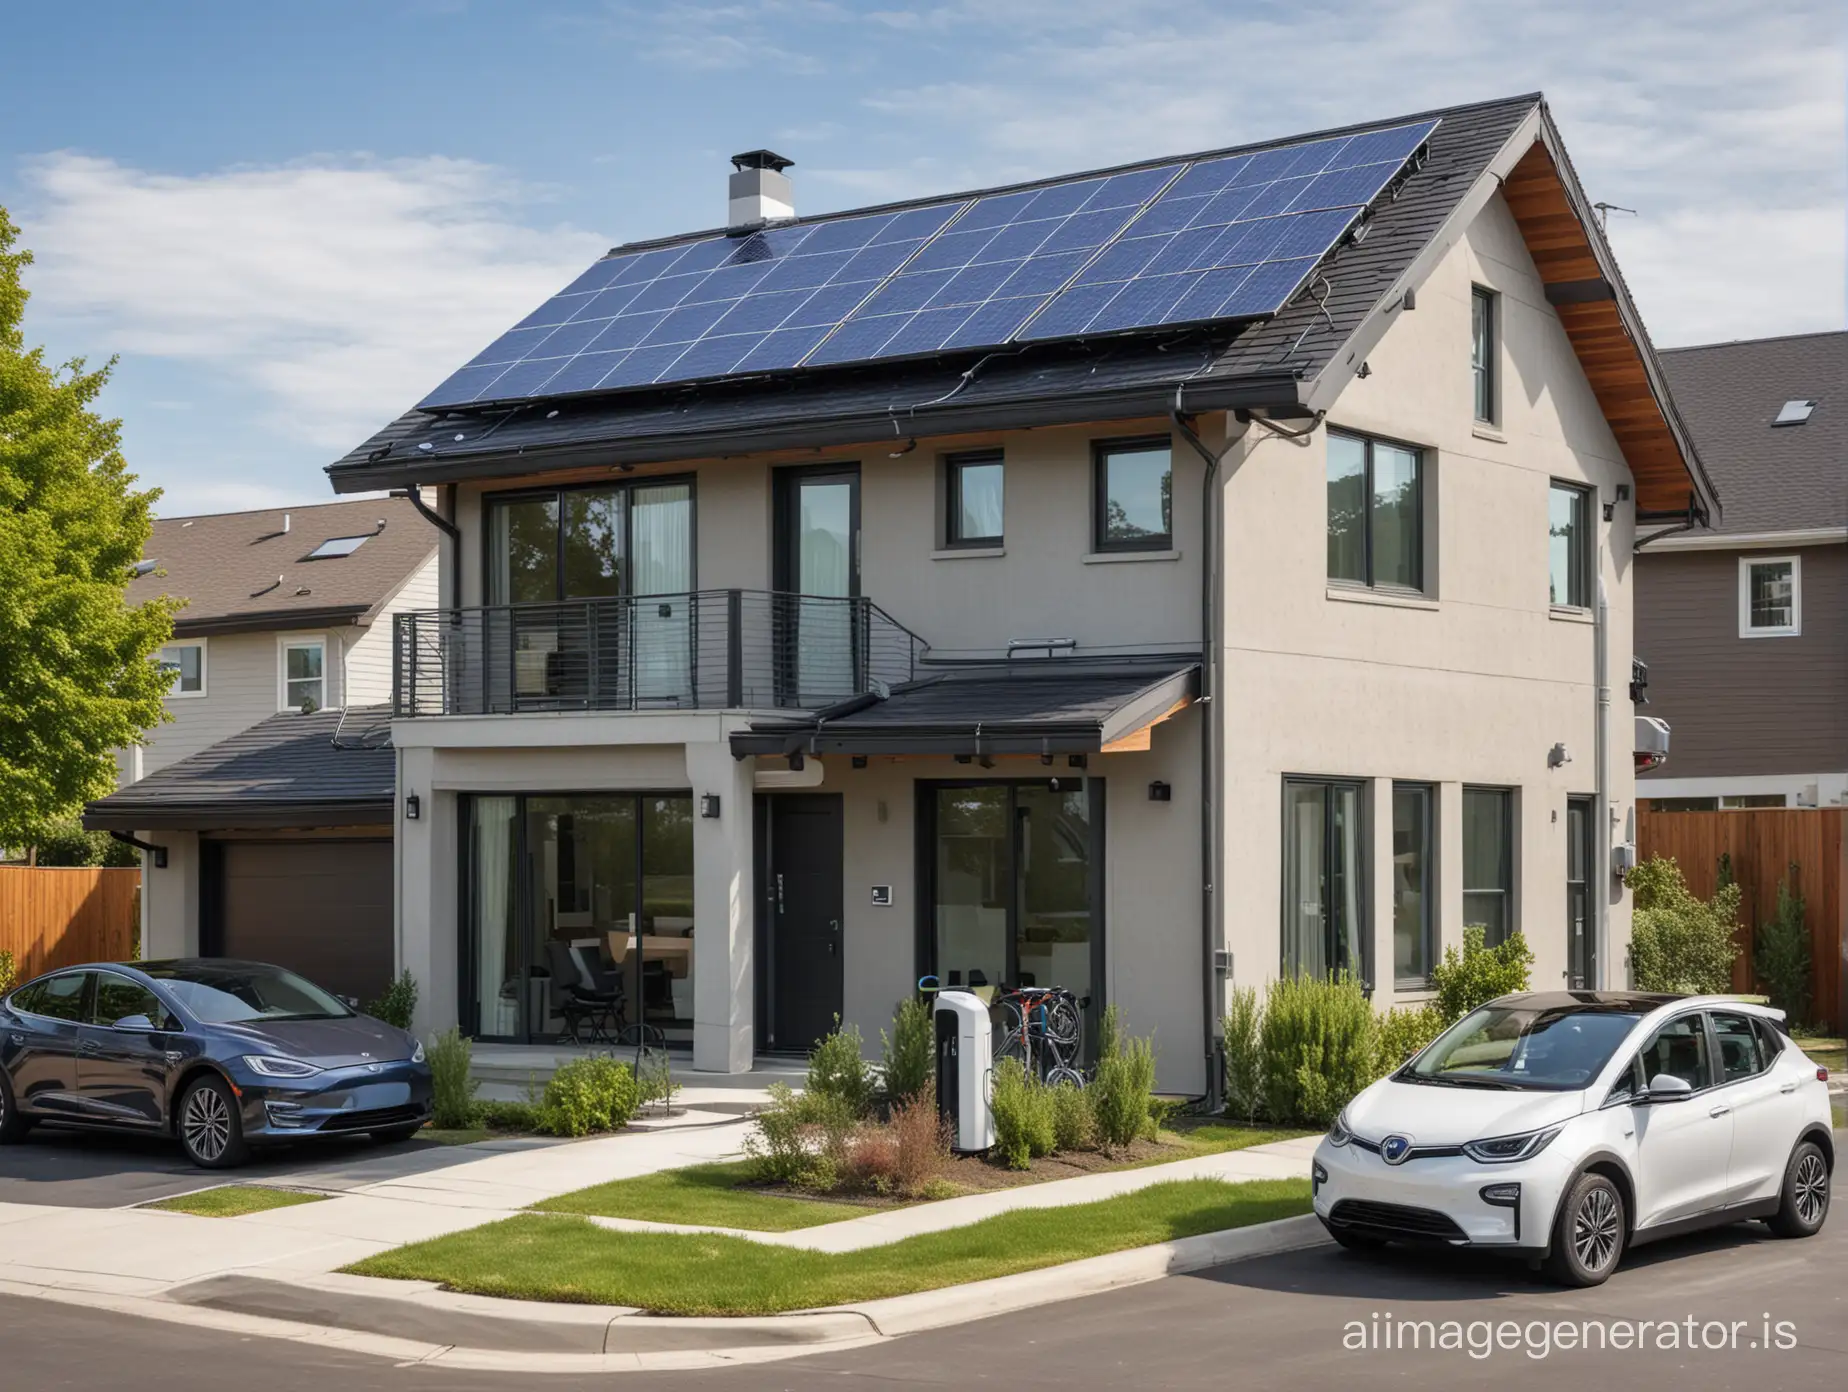 A two-story residential house with solar panels on the roof and an electric car connected to a charging station.